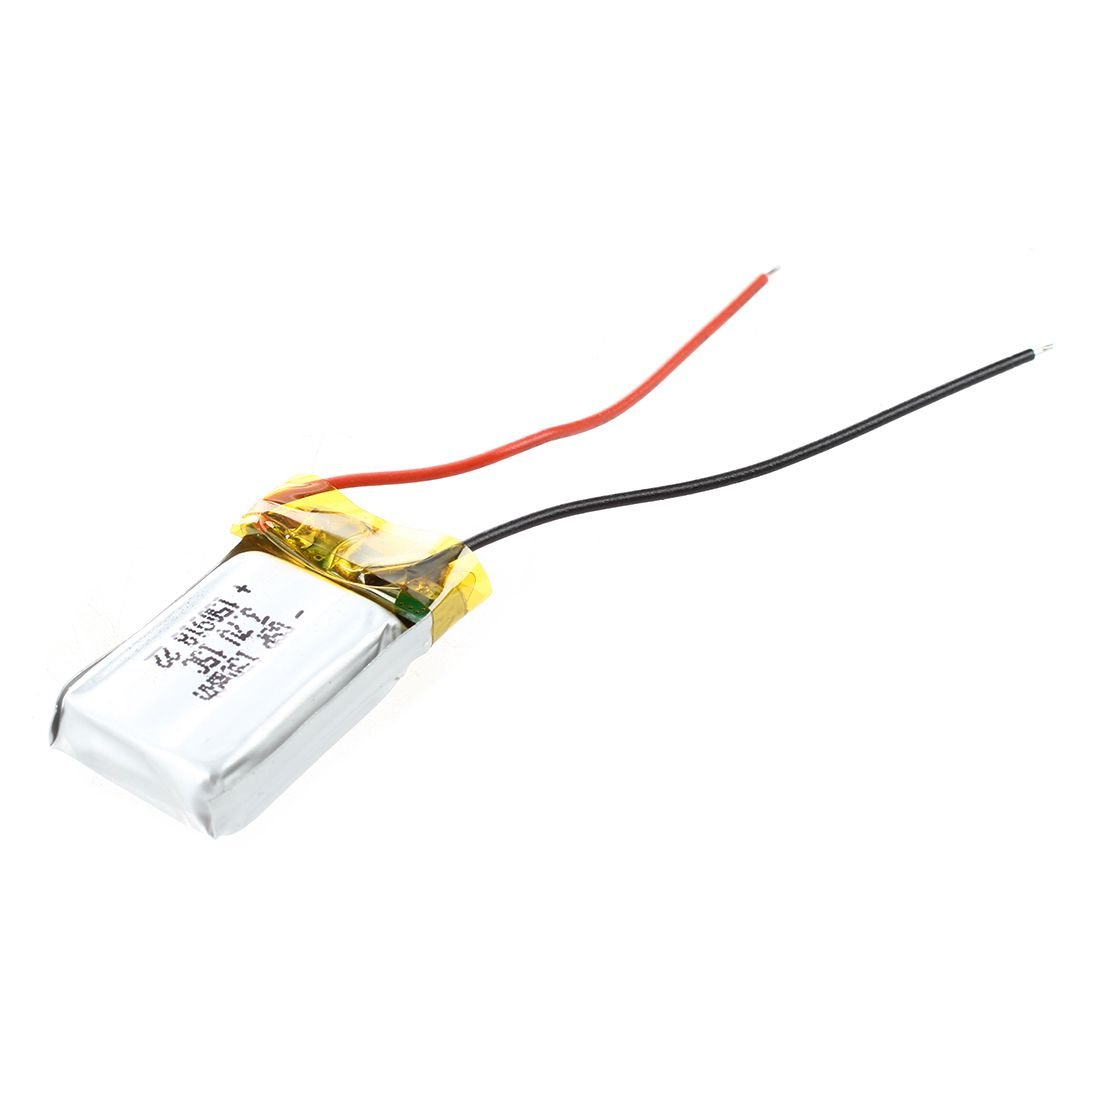 Batterie Lithium Ion Polymere - 3.7v 150mAh